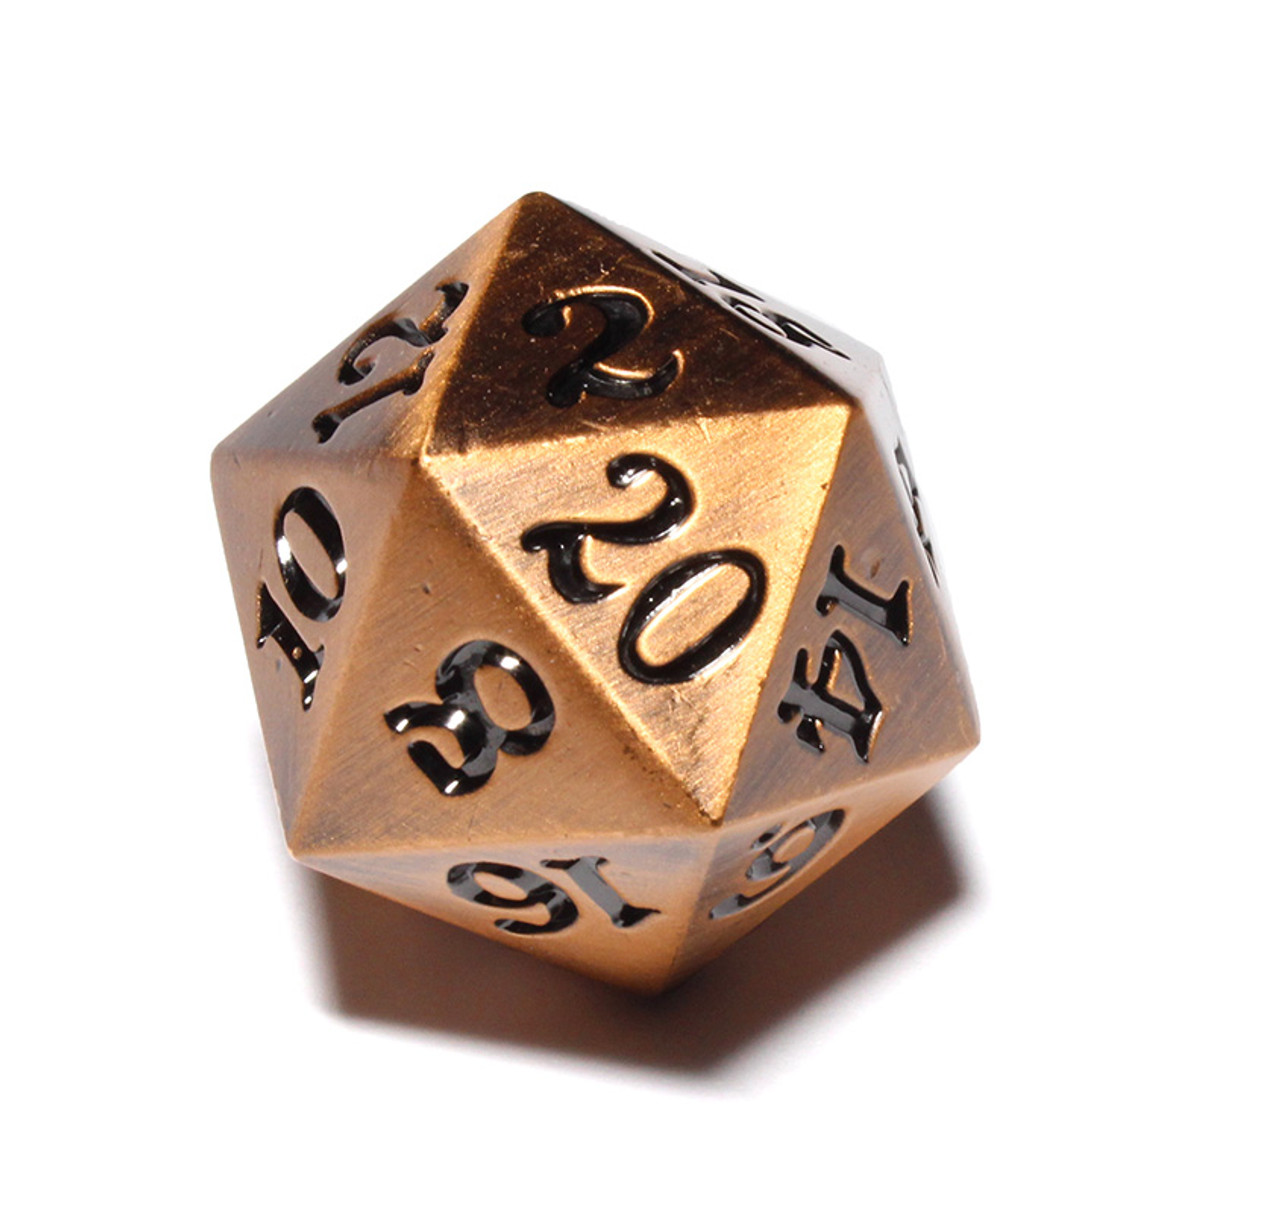 Legendary Silver D20 Dice - Metal Single 20 Sided Dice - Easy Roller Dice  Company